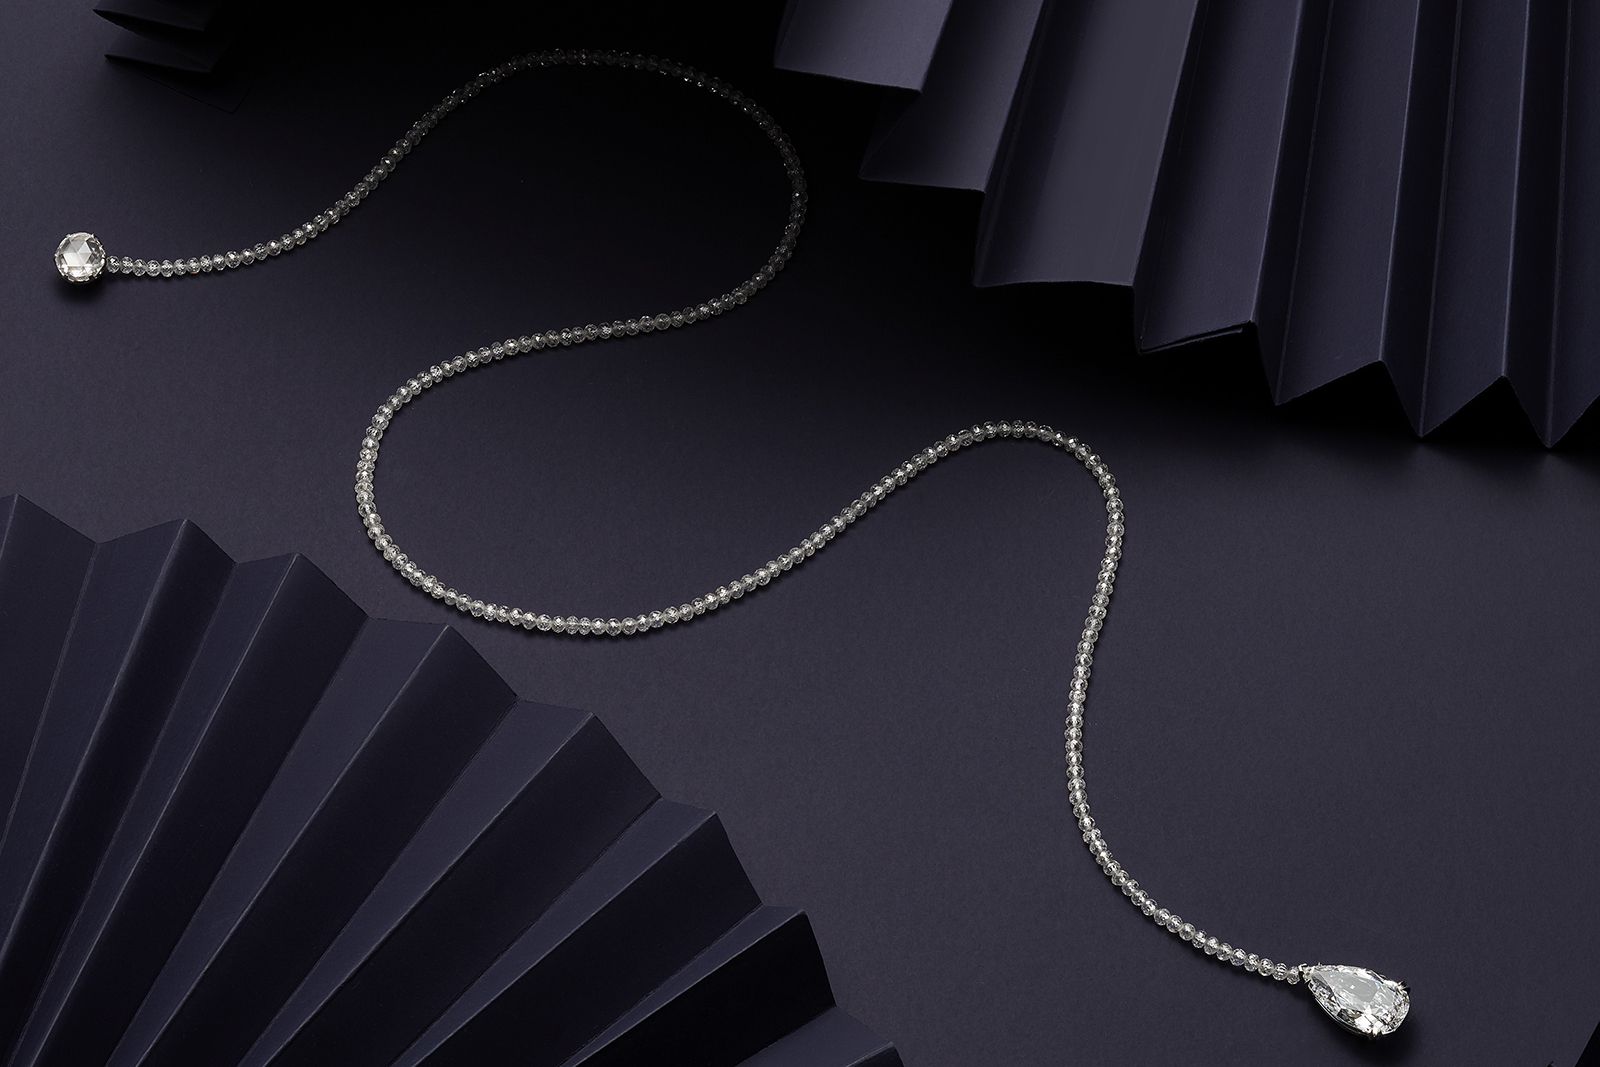 Bonhams’ London Jewels sale in April 2022 contains this diamond lavallière necklace (Lot number 235, estimate £120,000 - £180,000) with a single strand of diamond rondelles, totalling 24.14 carats, terminating in a 5.09 carat pear-shaped diamond drop